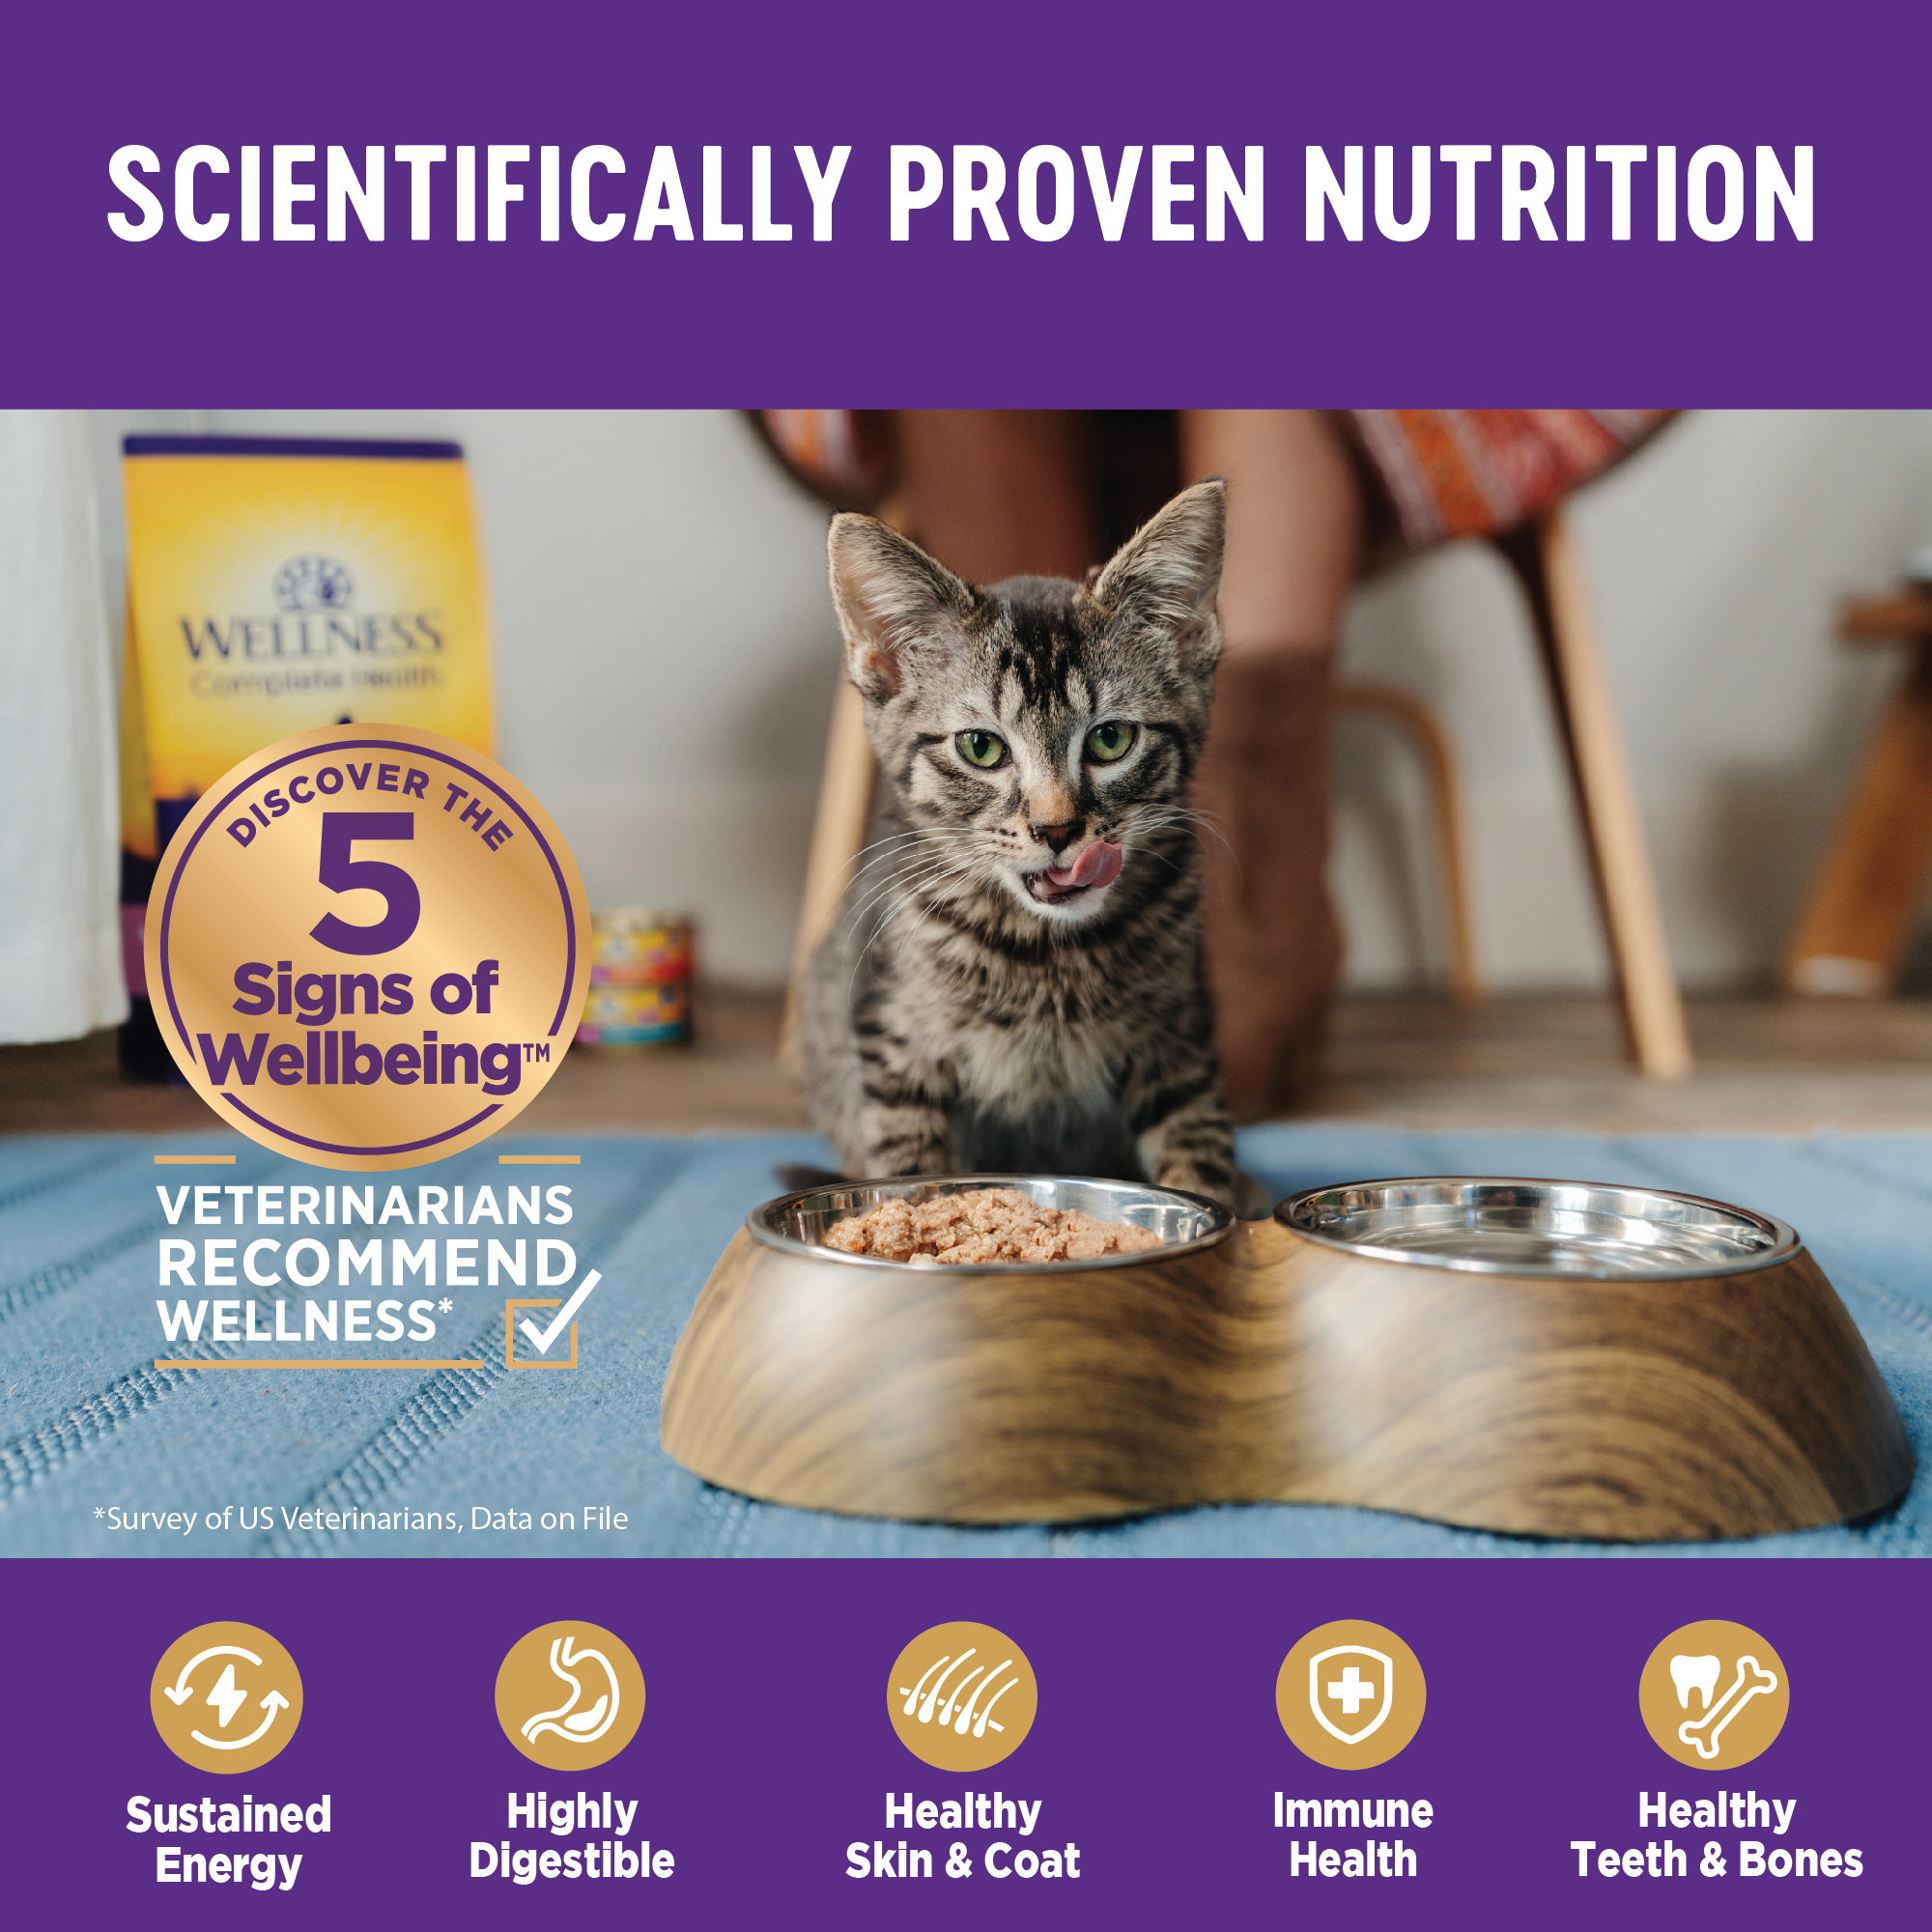 Wellness Complete Health Grain Free Canned Cat Food, Turkey Dinner Pate, 12.5 Ounces (Pack of 12) - image 5 of 9